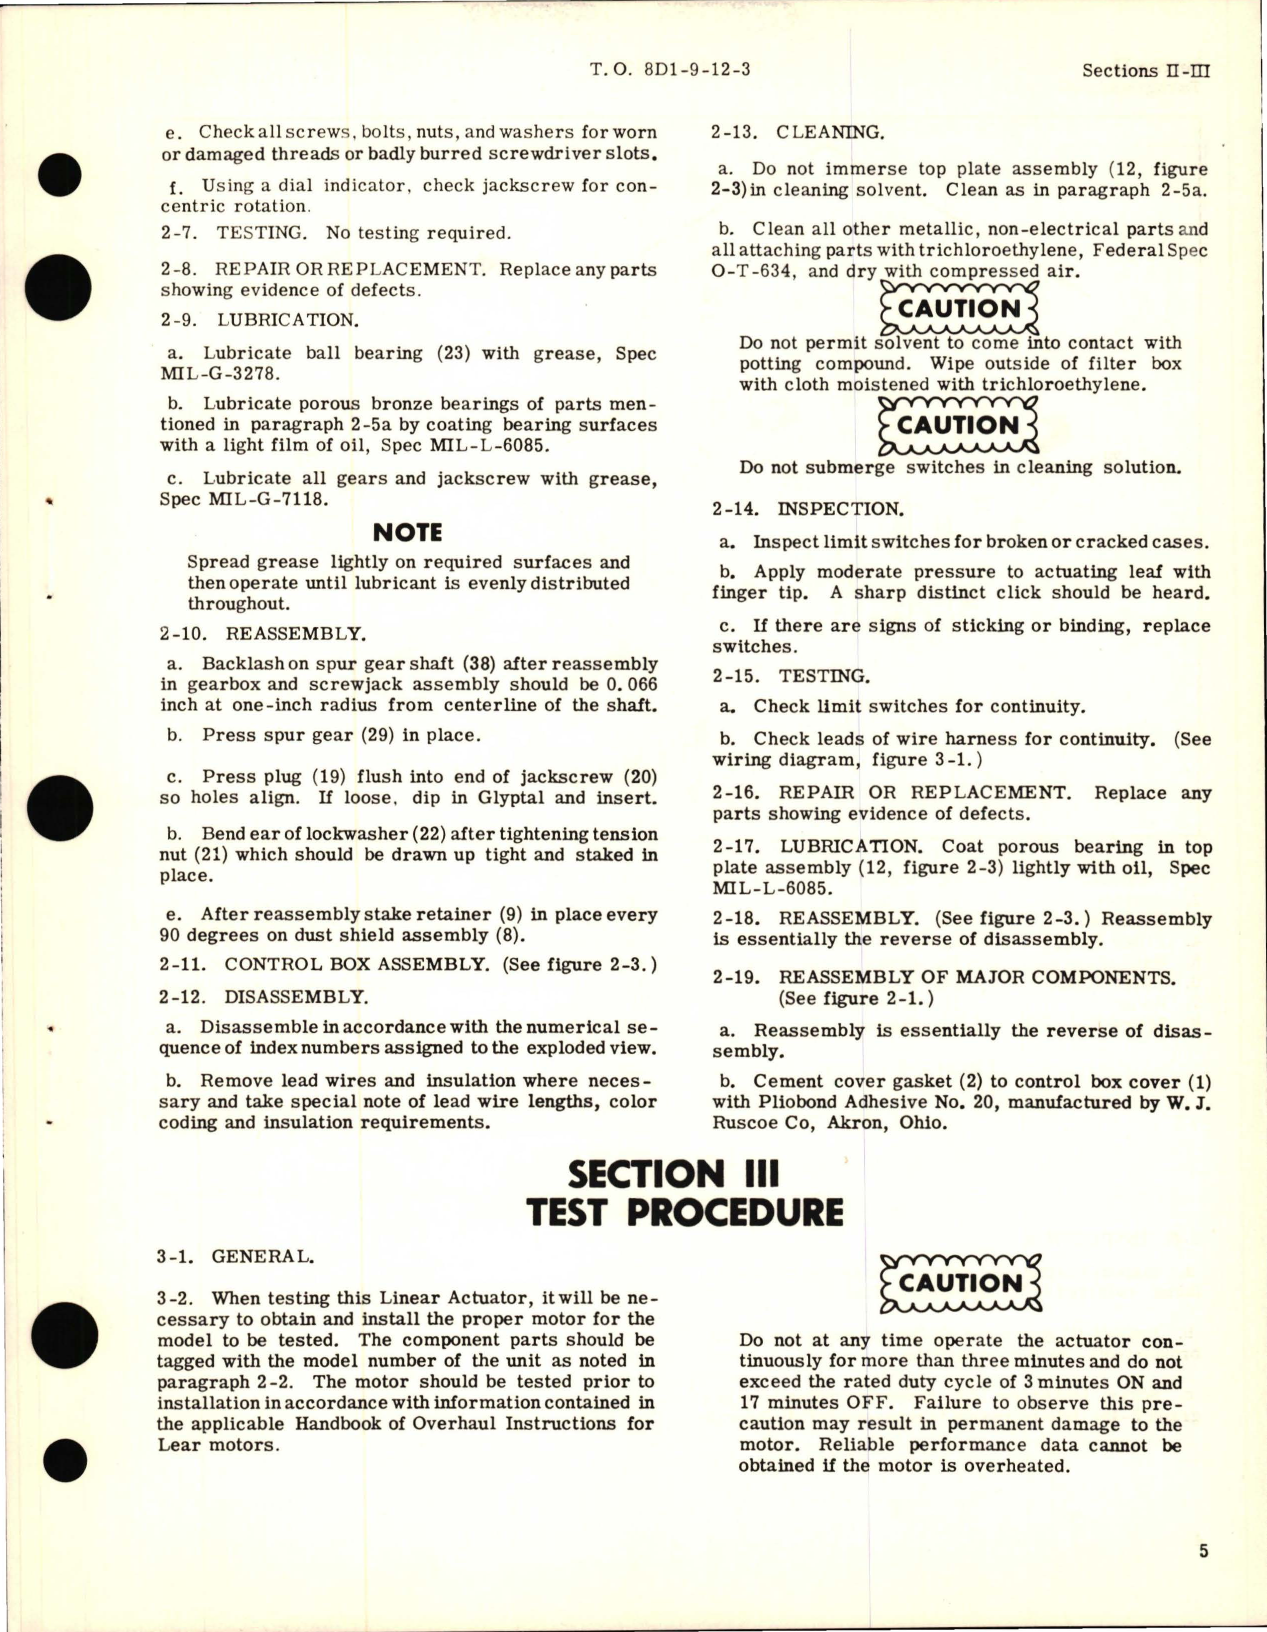 Sample page 7 from AirCorps Library document: Overhaul Instructions for Linear Actuator Assembly 423 Series